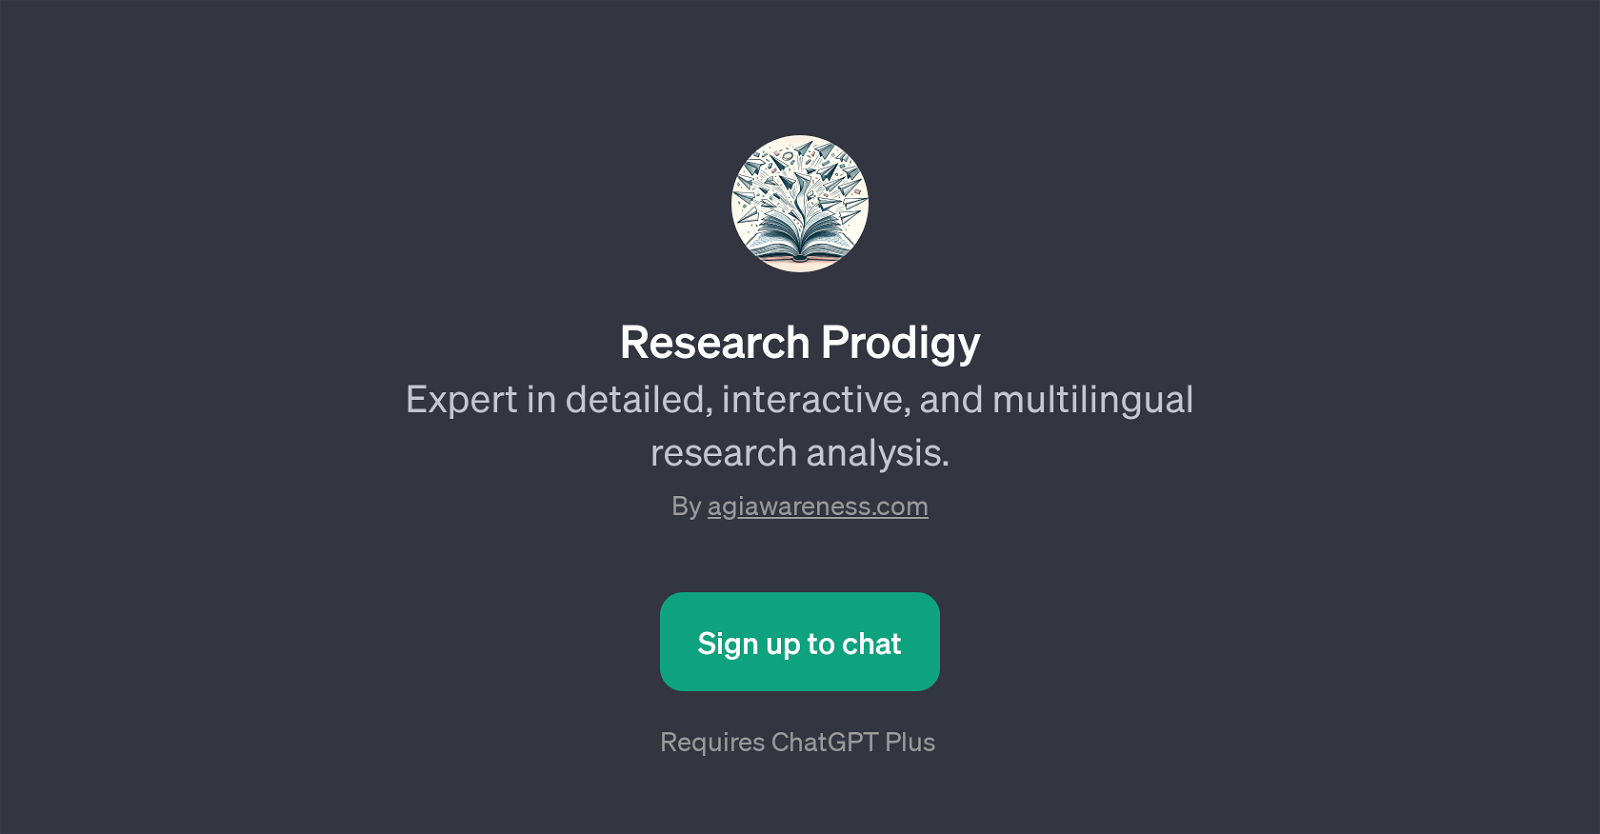 Research Prodigy website